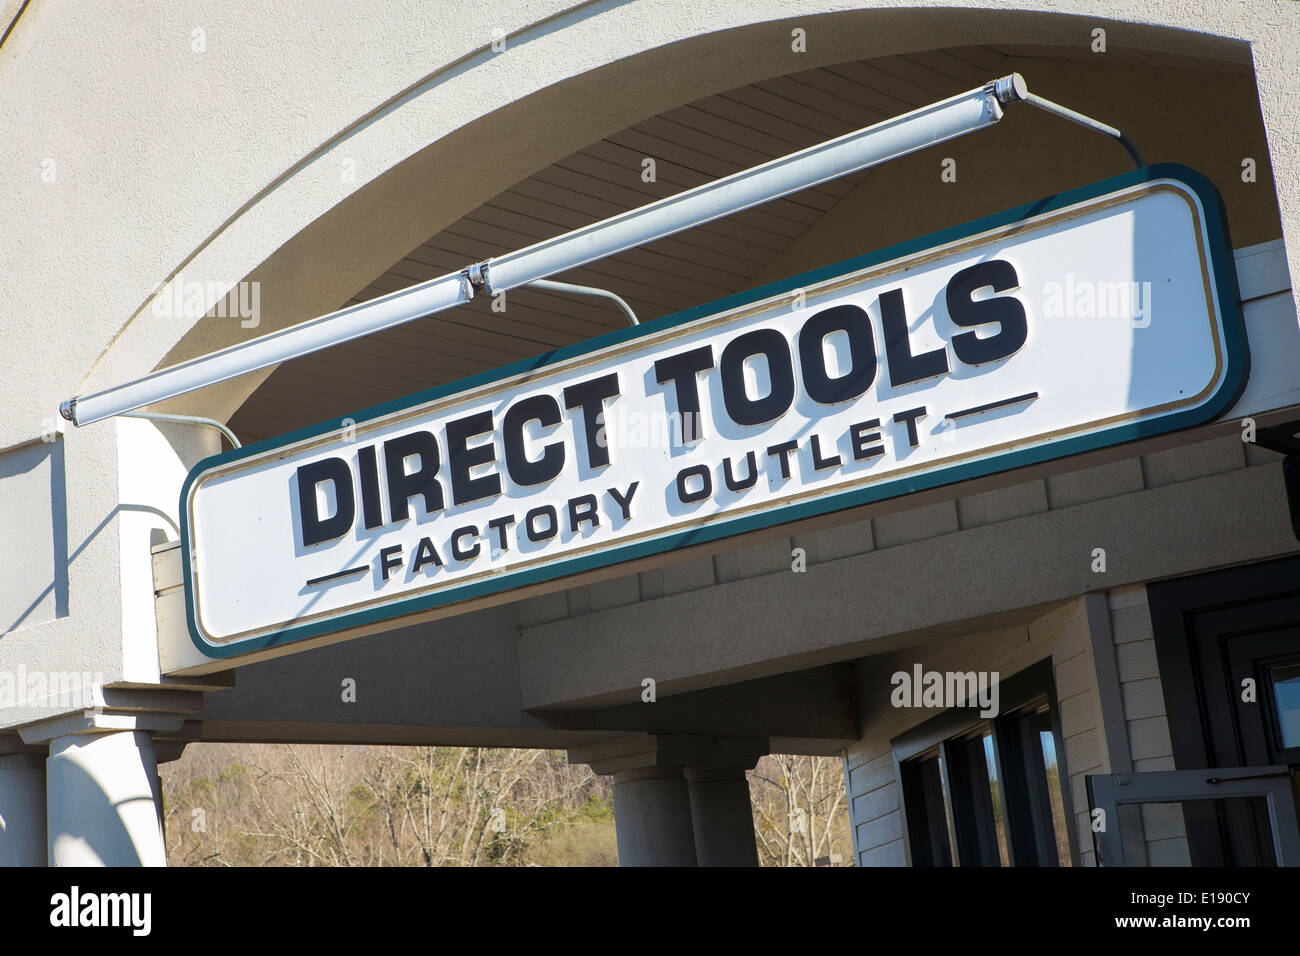 Direct Tools Factory Outlet is pictured in Tanger Outlets in Sevierville, Tennessee Stock Photo